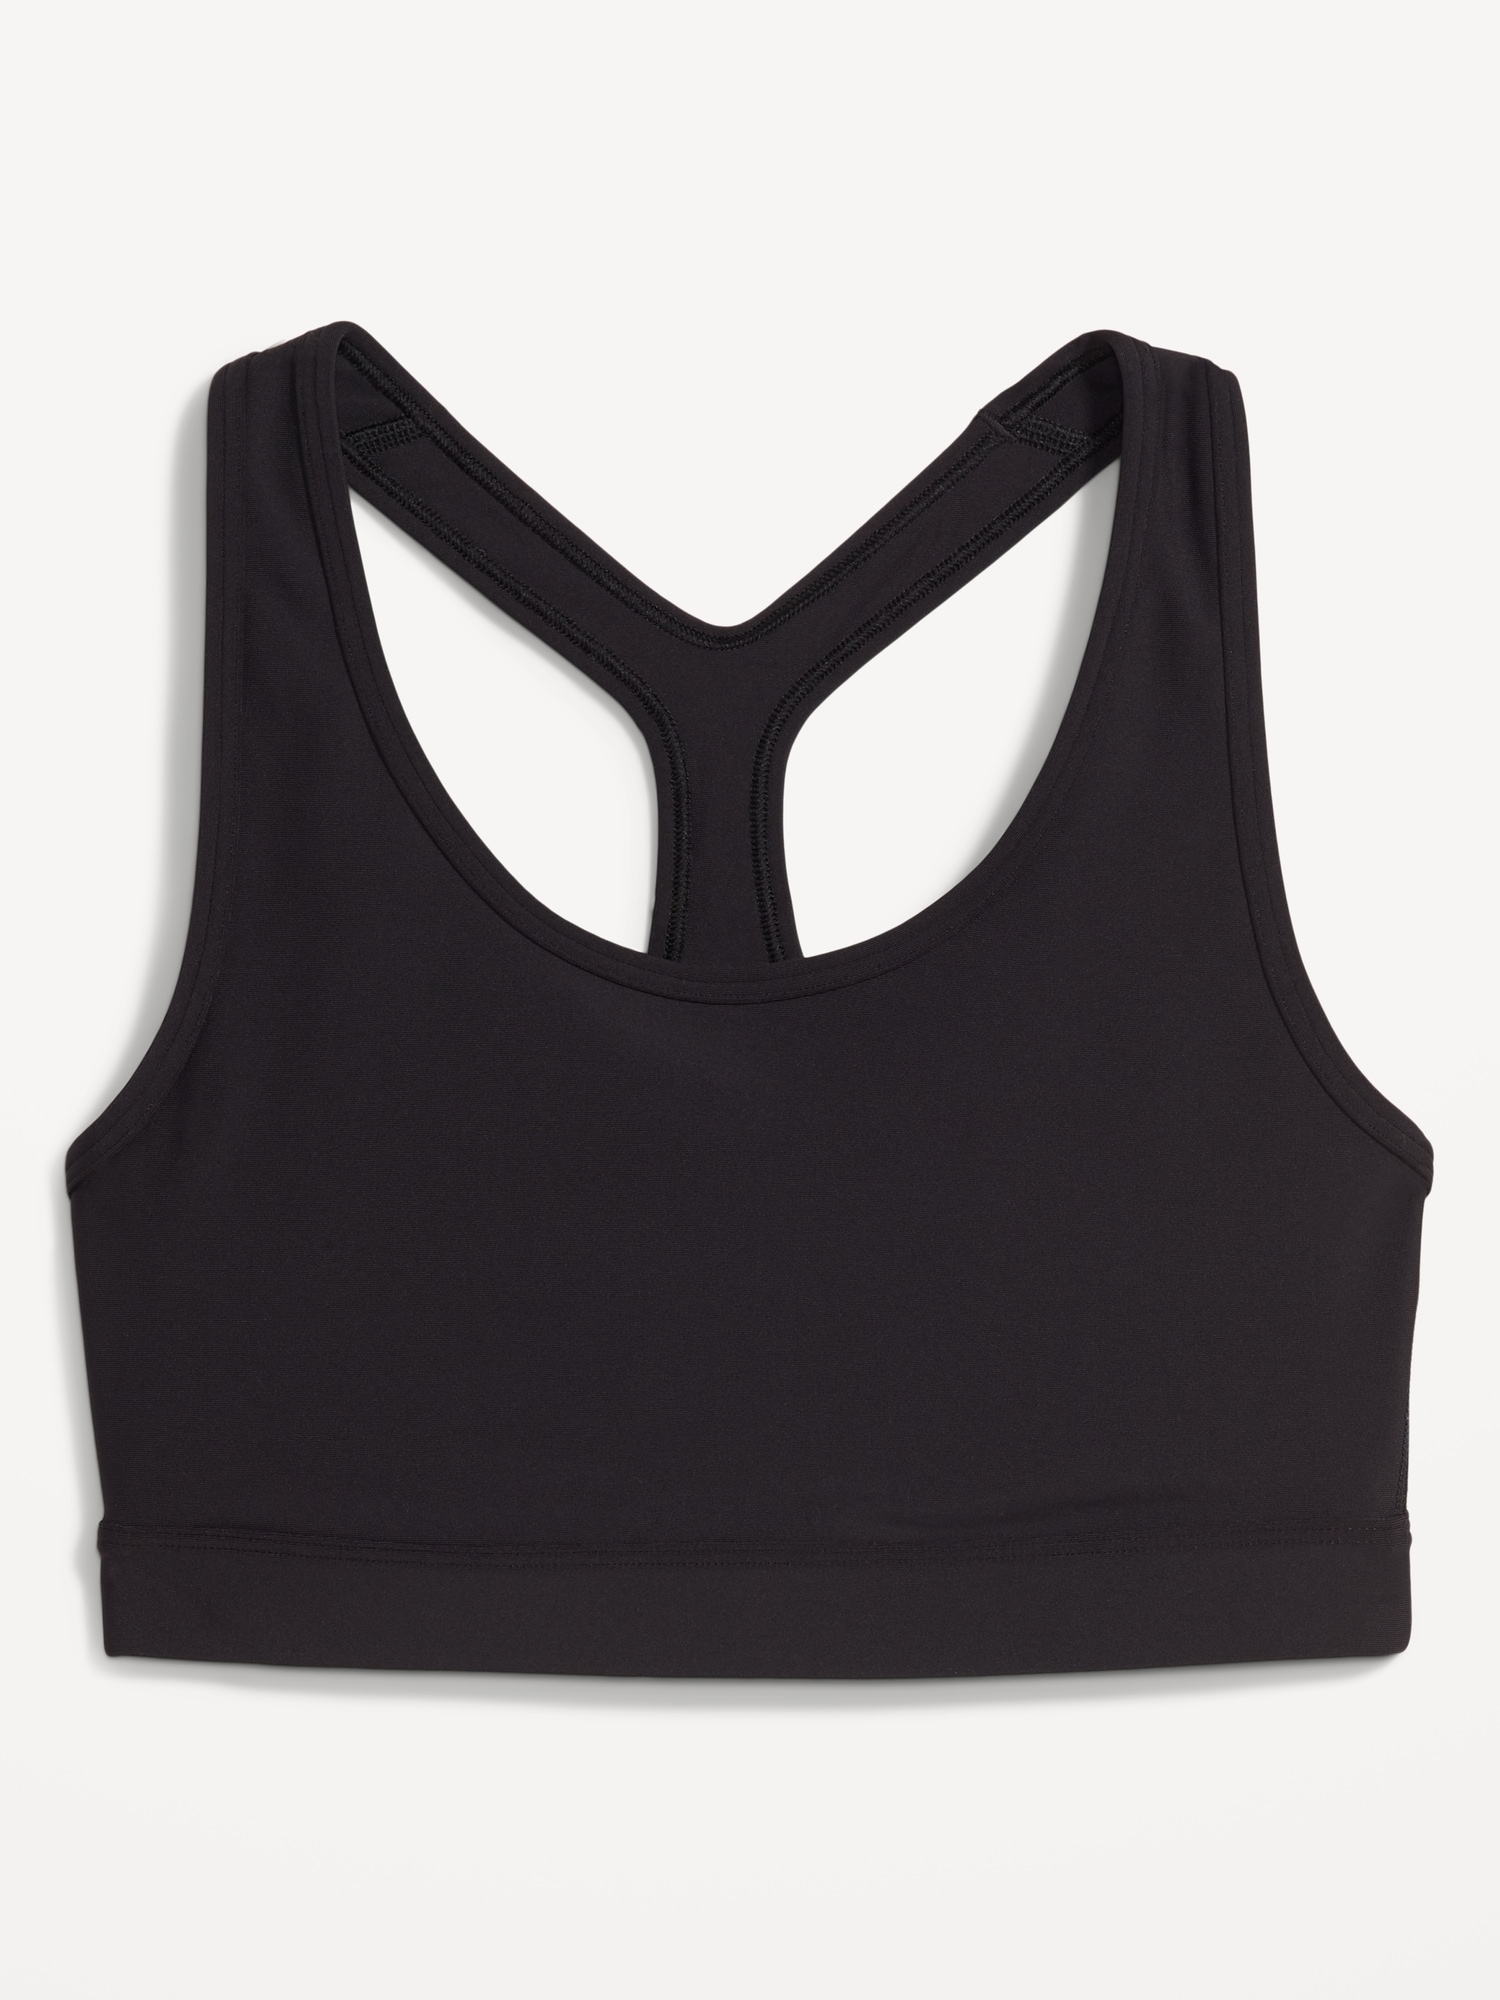 Old Navy Light Support Seamless Racerback Sports Bra - Black NWT Small  287693